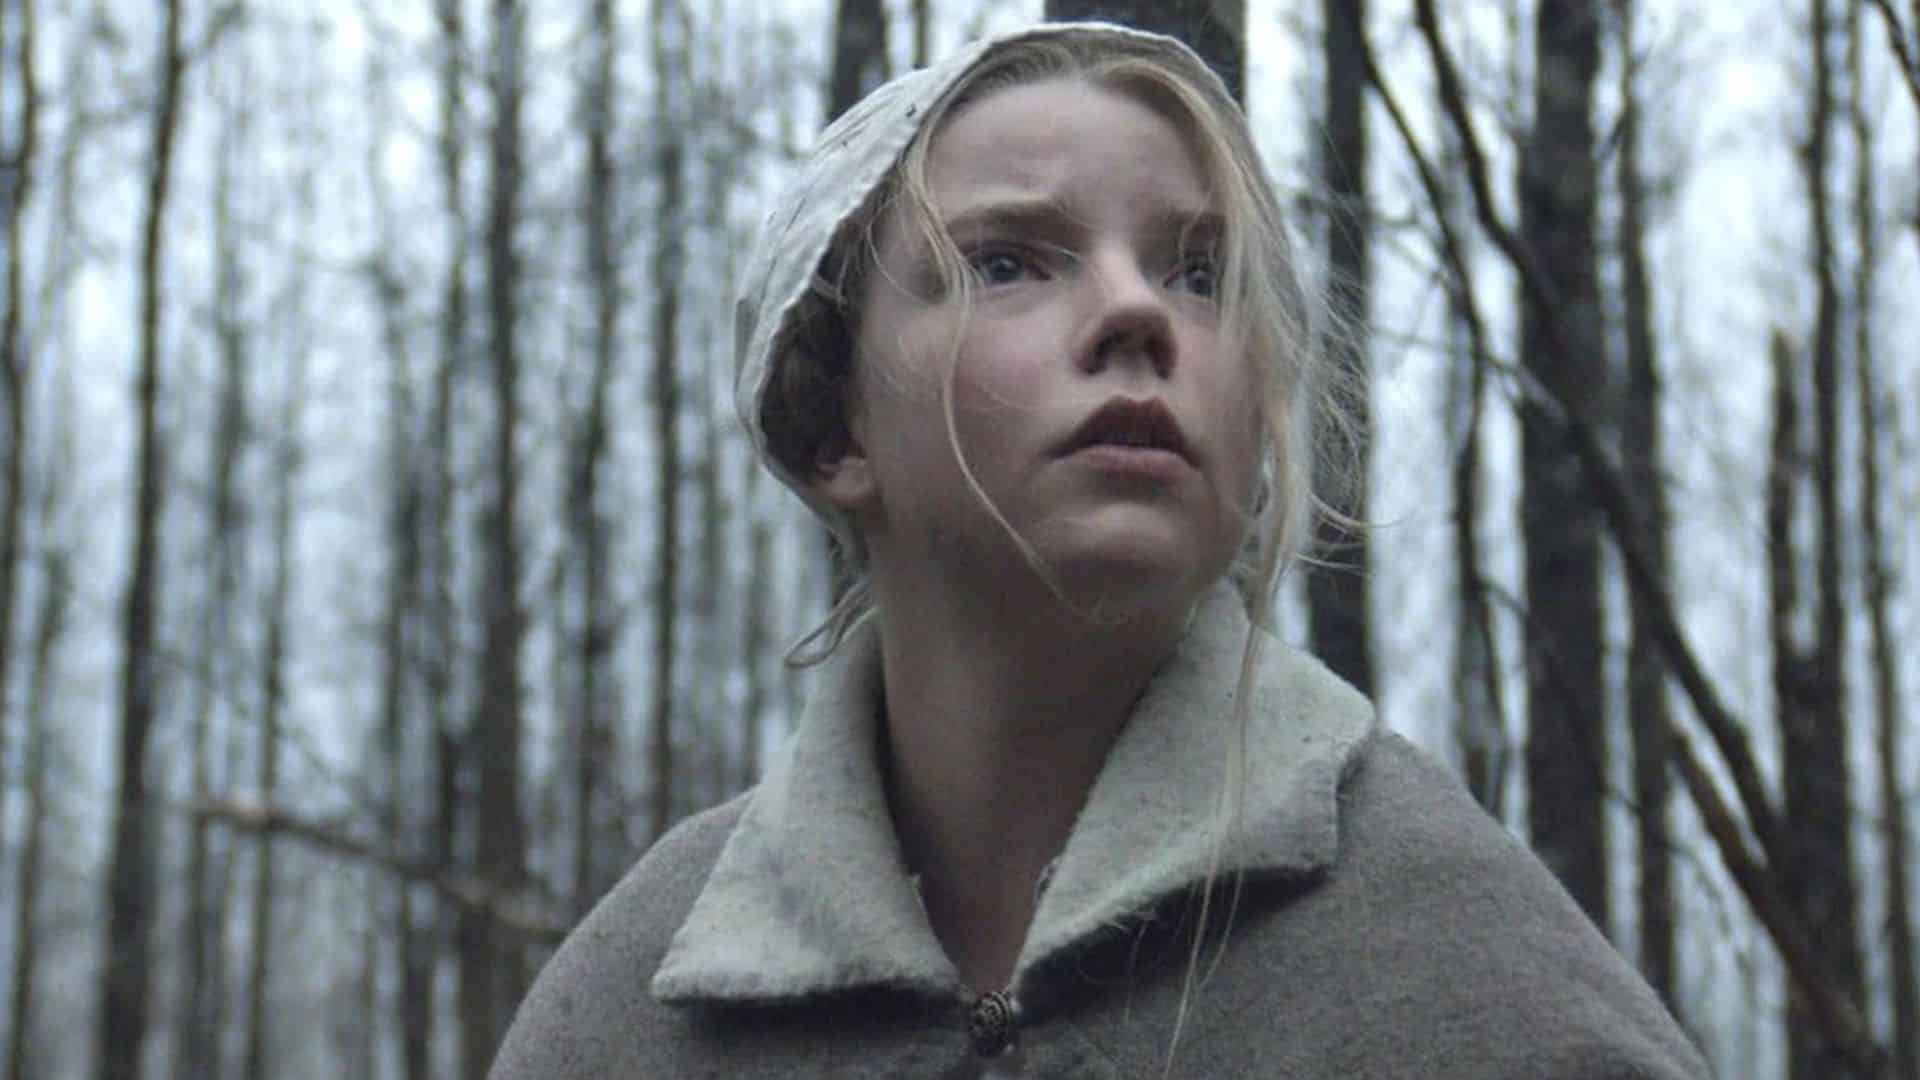 A young girl in Puritan clothing in a forest in this image from Rooks Nest Entertainment